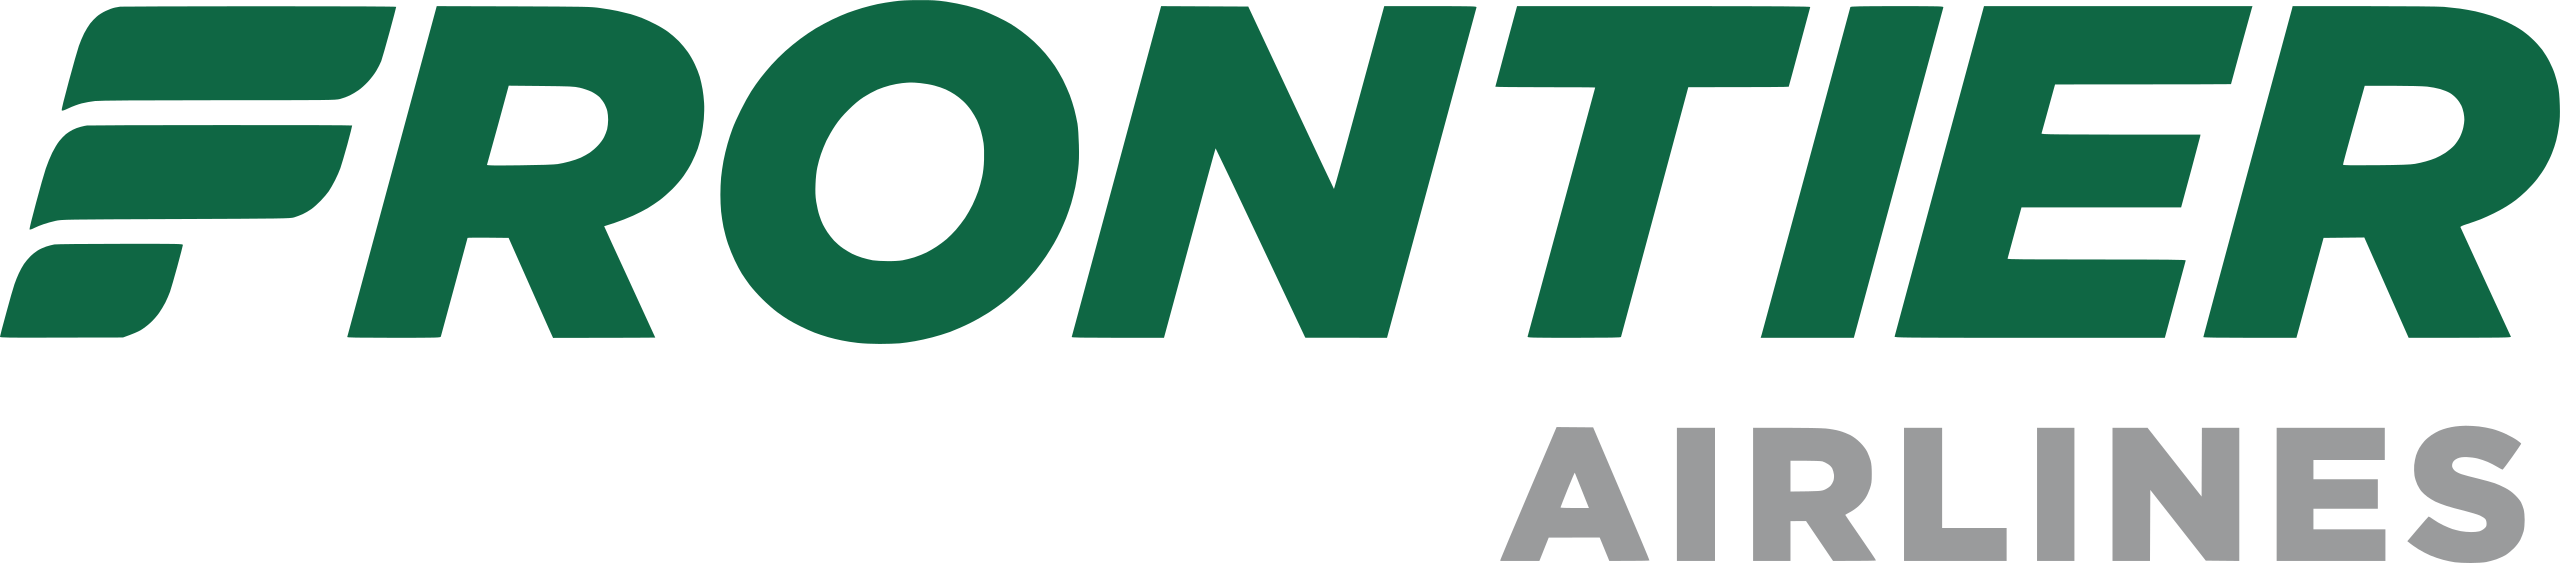 Frontier_Airlines_logo.svg-2